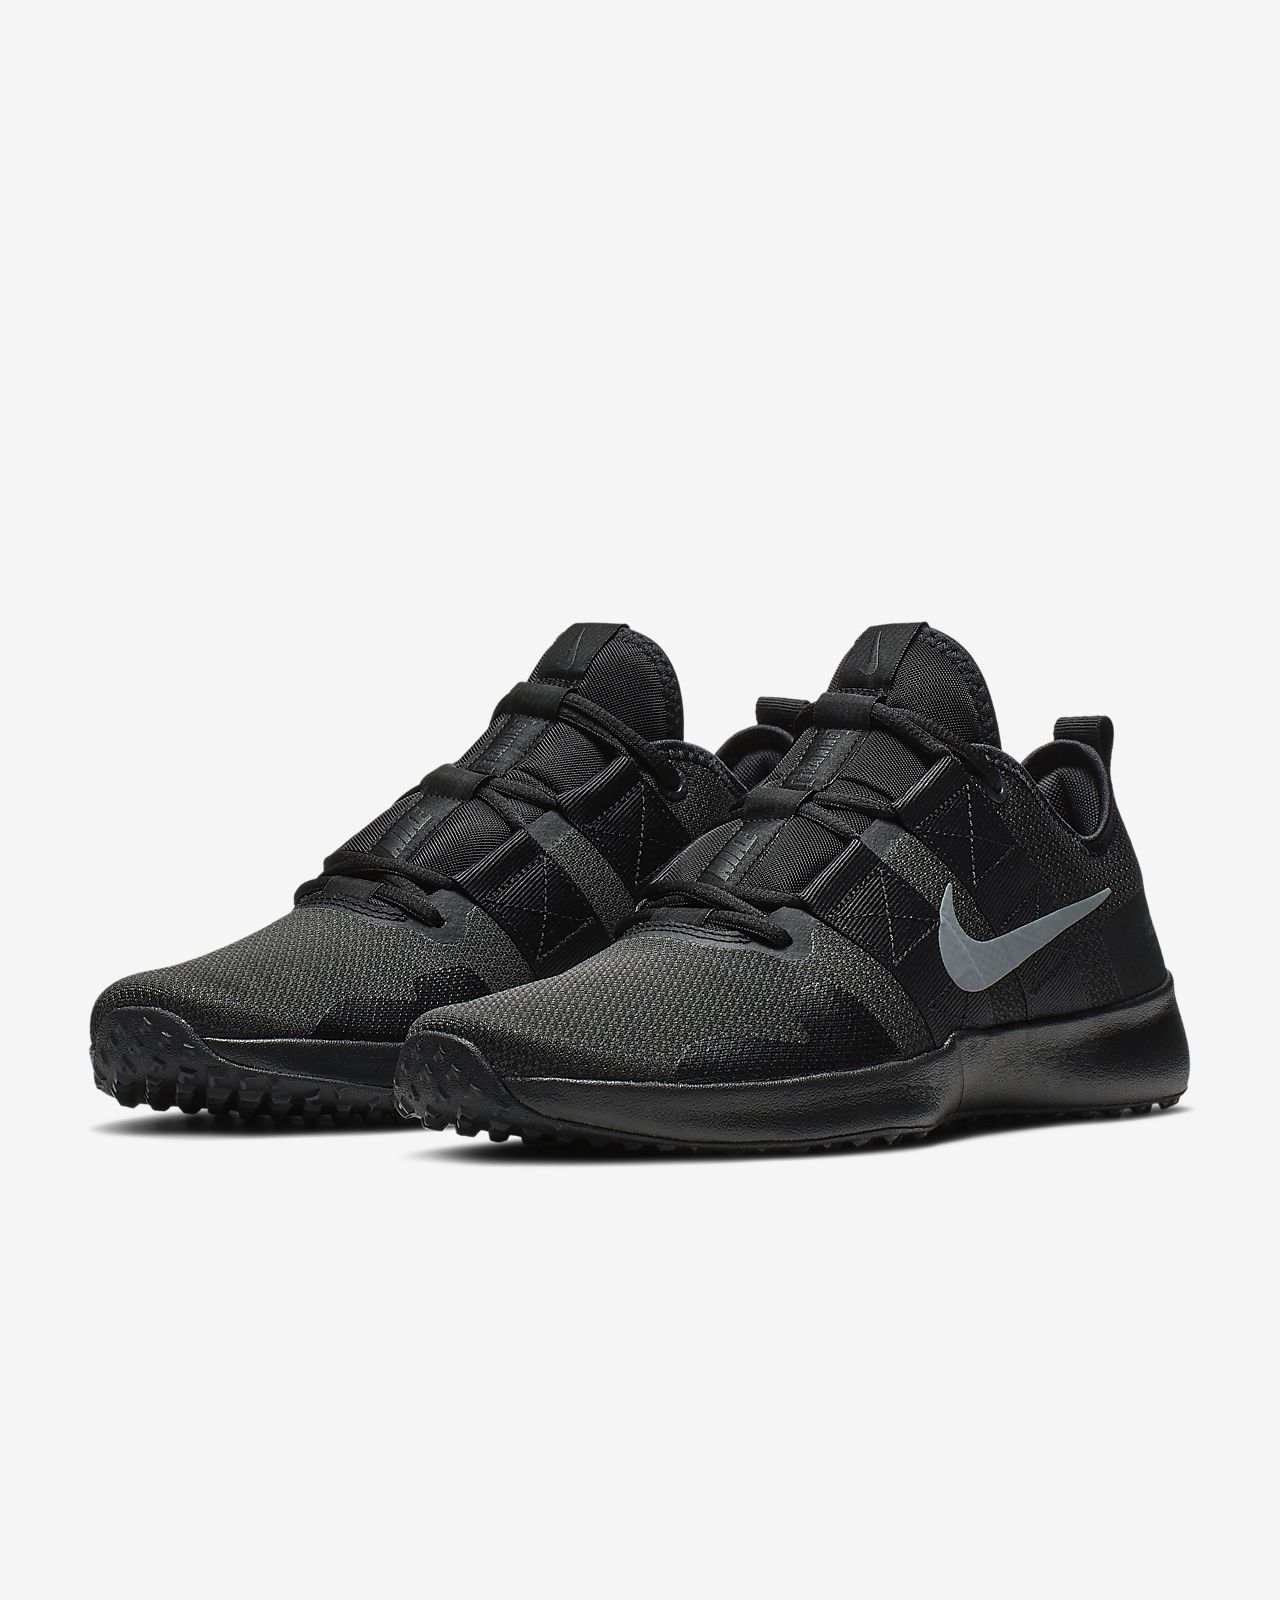 nike varsity compete trainer womens